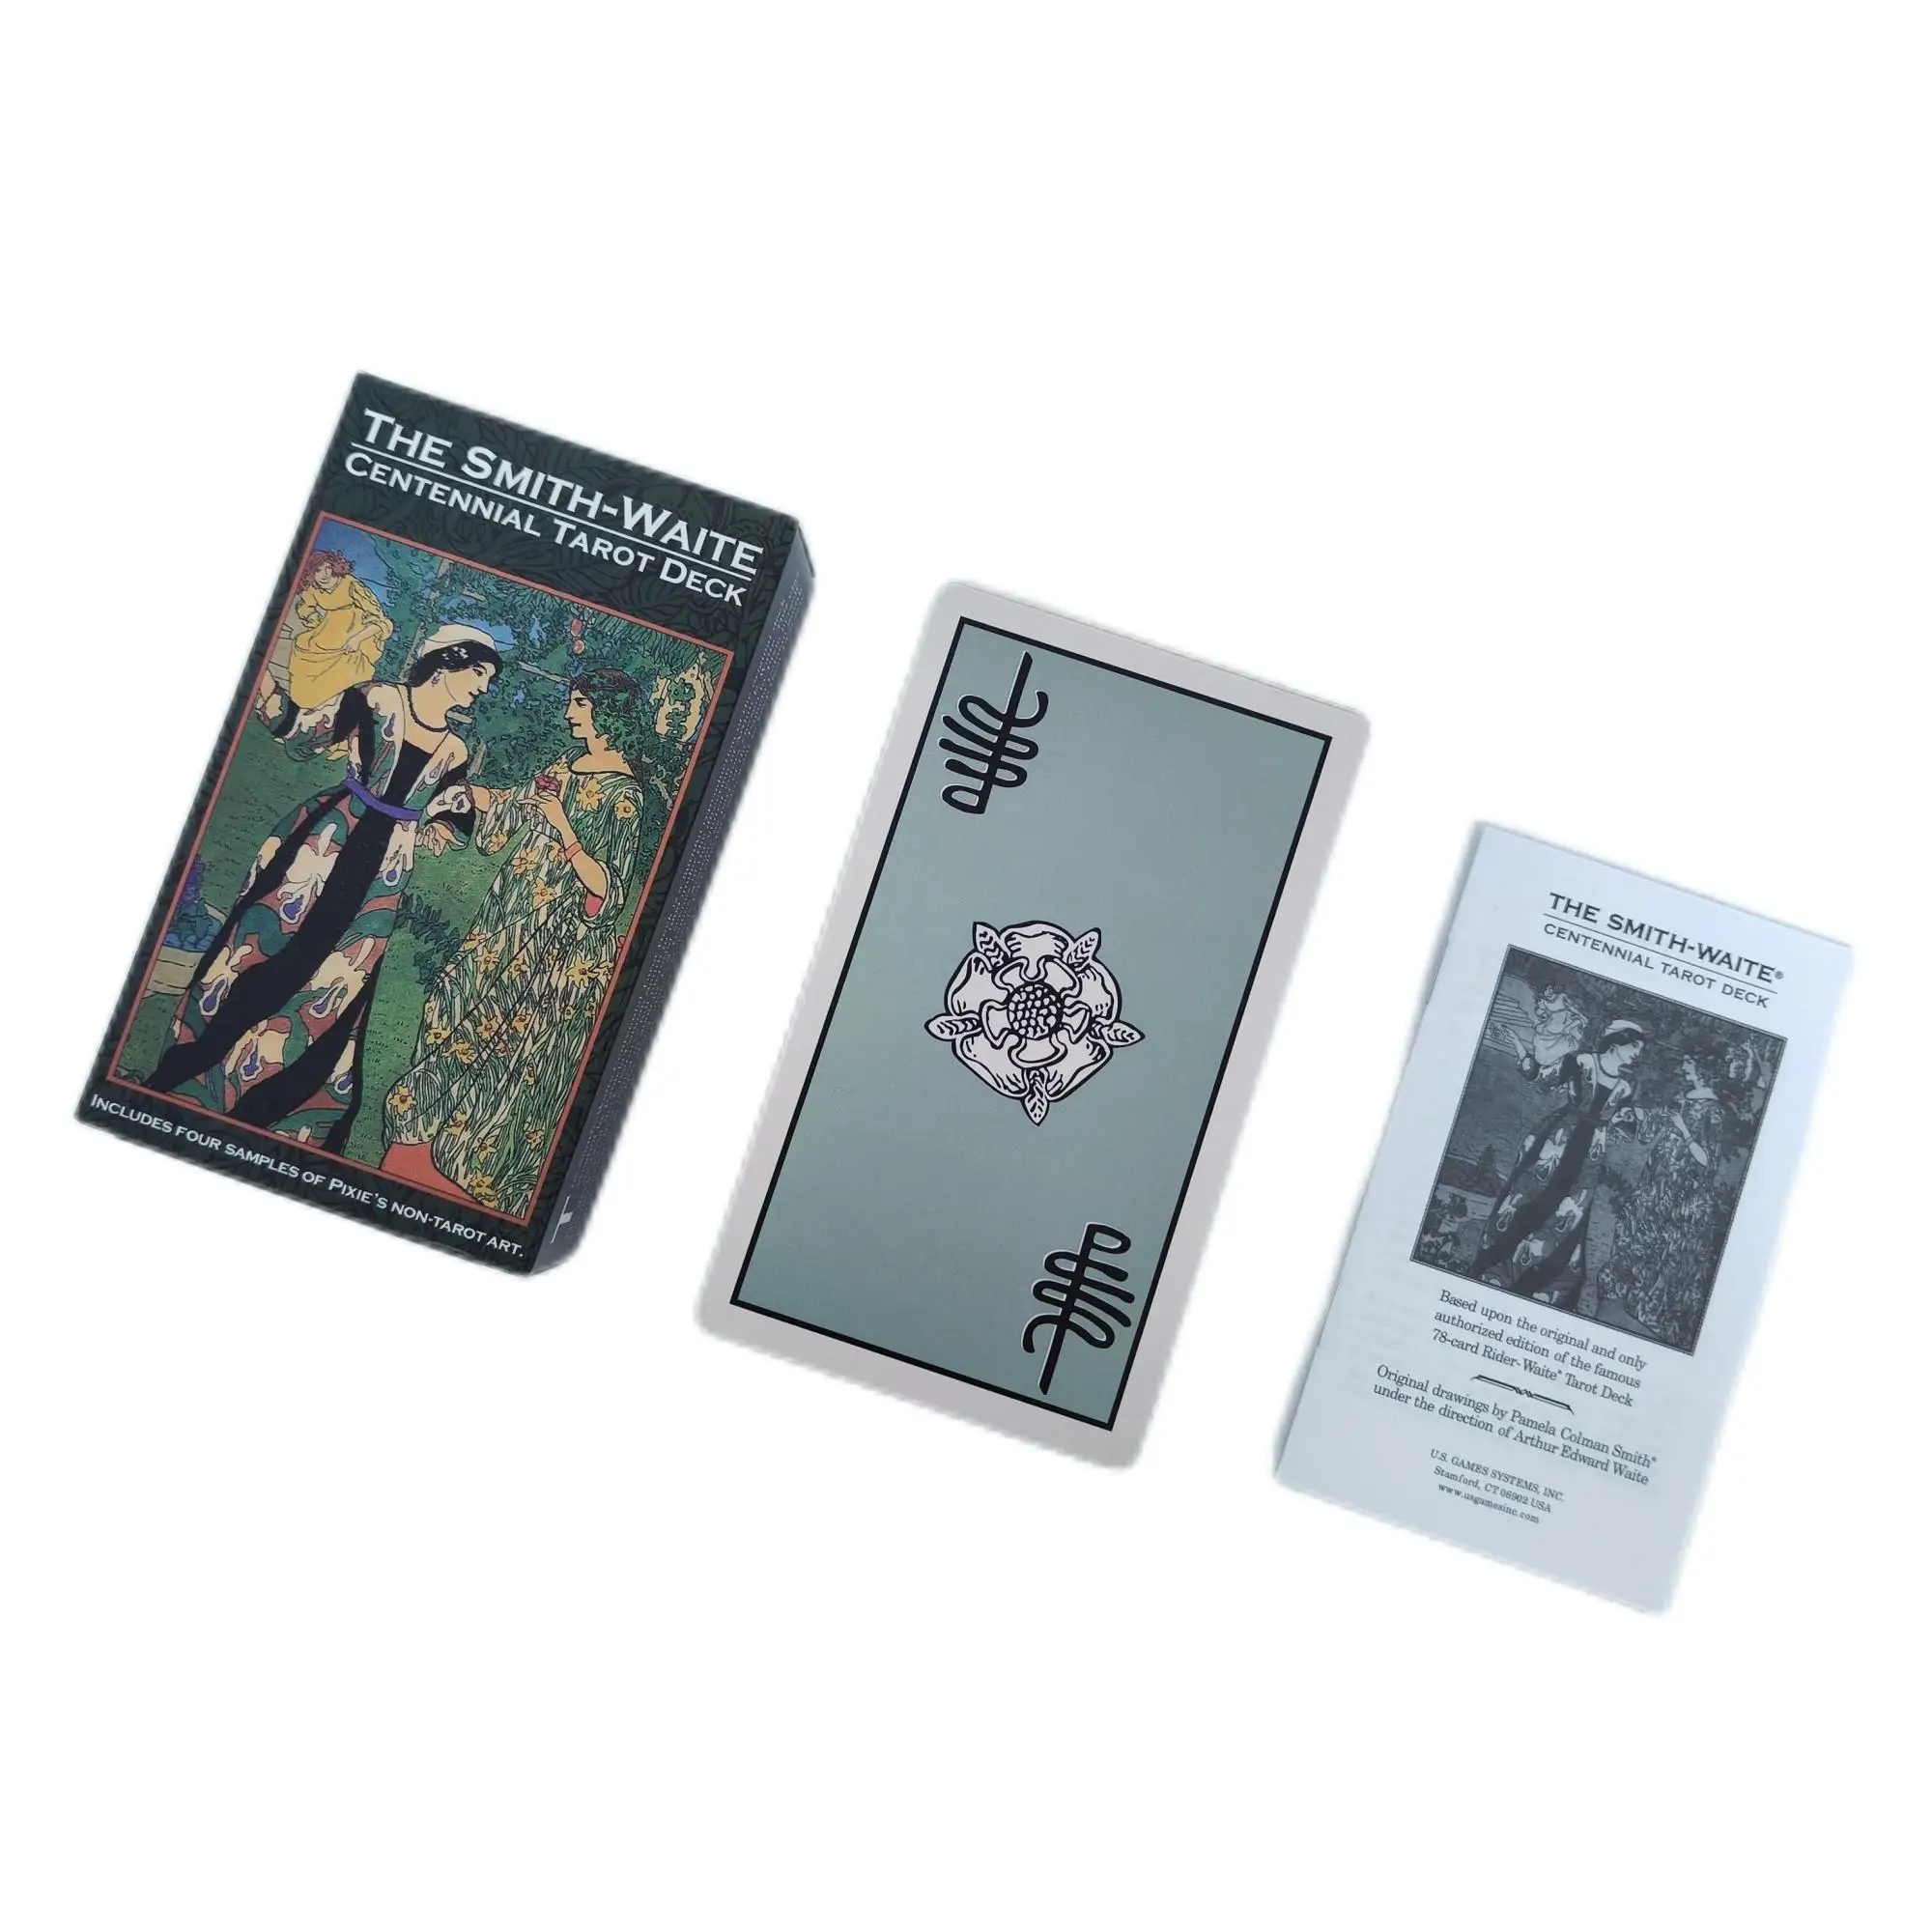 Hot Sale 12x7cm The Smith-waite Centennial Tarot Deck 84 Cards/Set With Instruction For Family Friends Party Gift Board Game